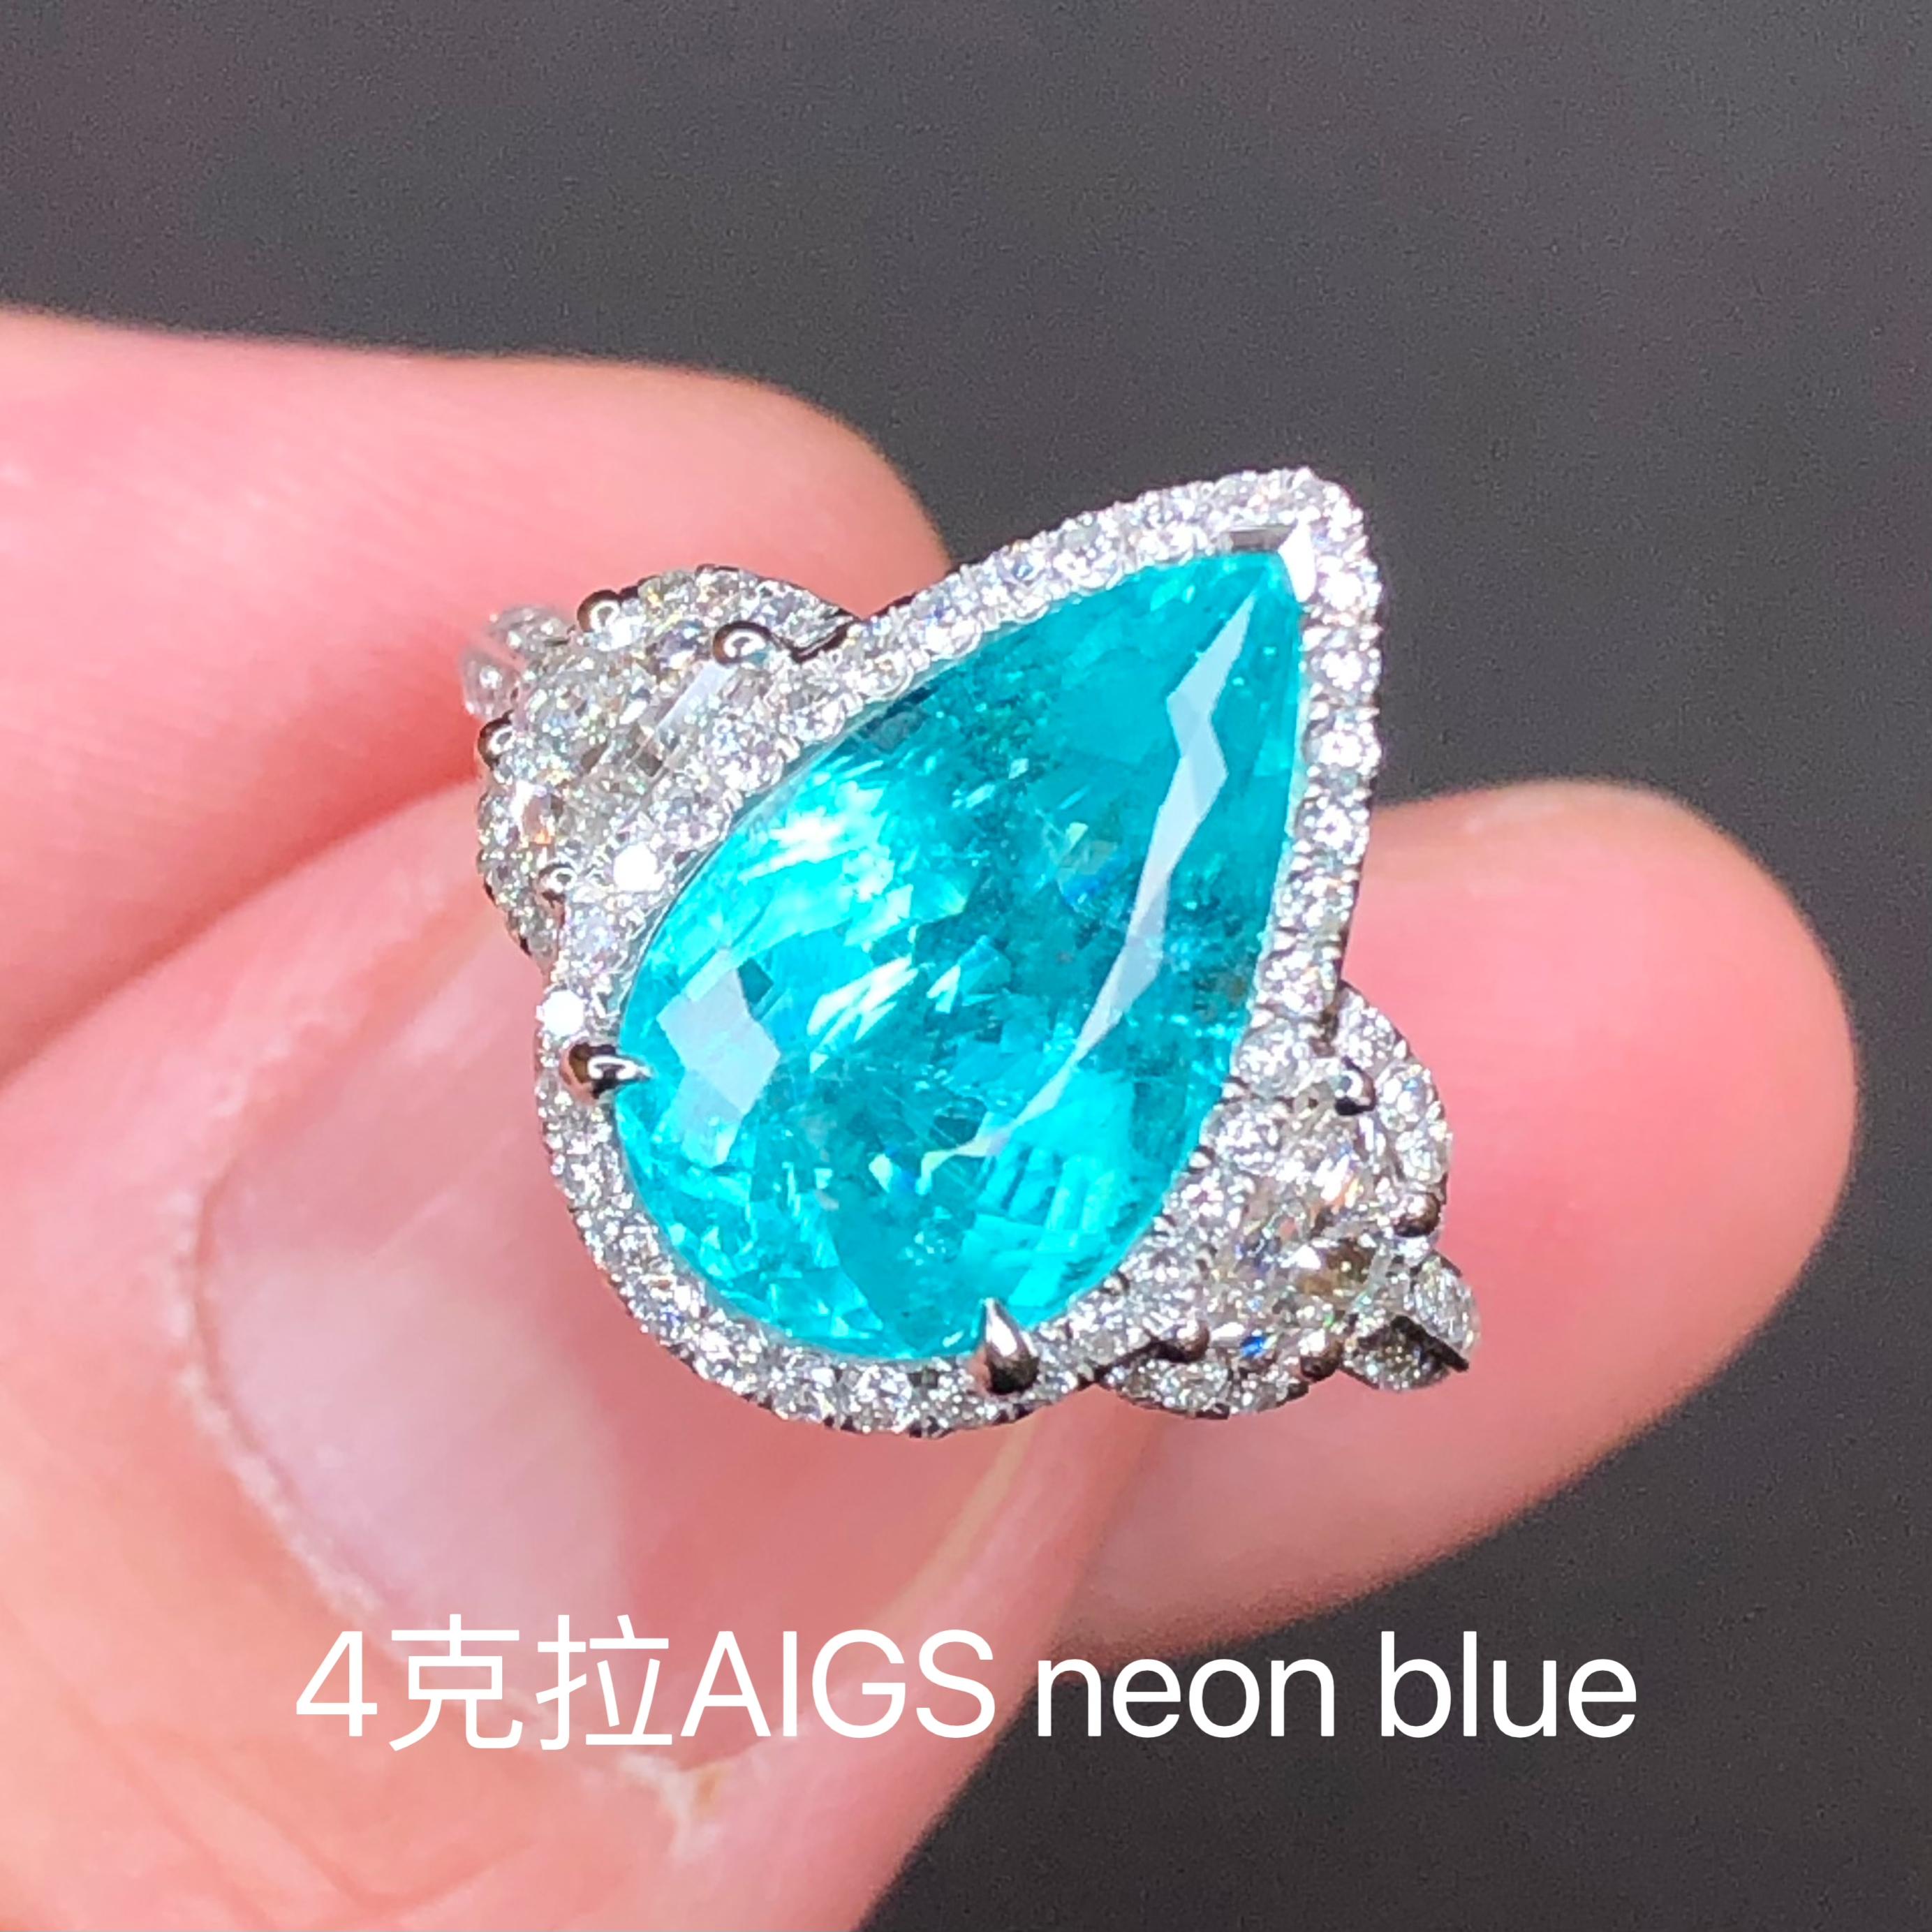 4.00 carats
Beautiful pear shape
AIGS Neon Blue. 
Very beautiful neon blue color. 
Clarify is not bad and definitely acceptable unless you need flawless ones. No black inclusions, no crack, no reflections. All inclusions are transparent. 
Origin: